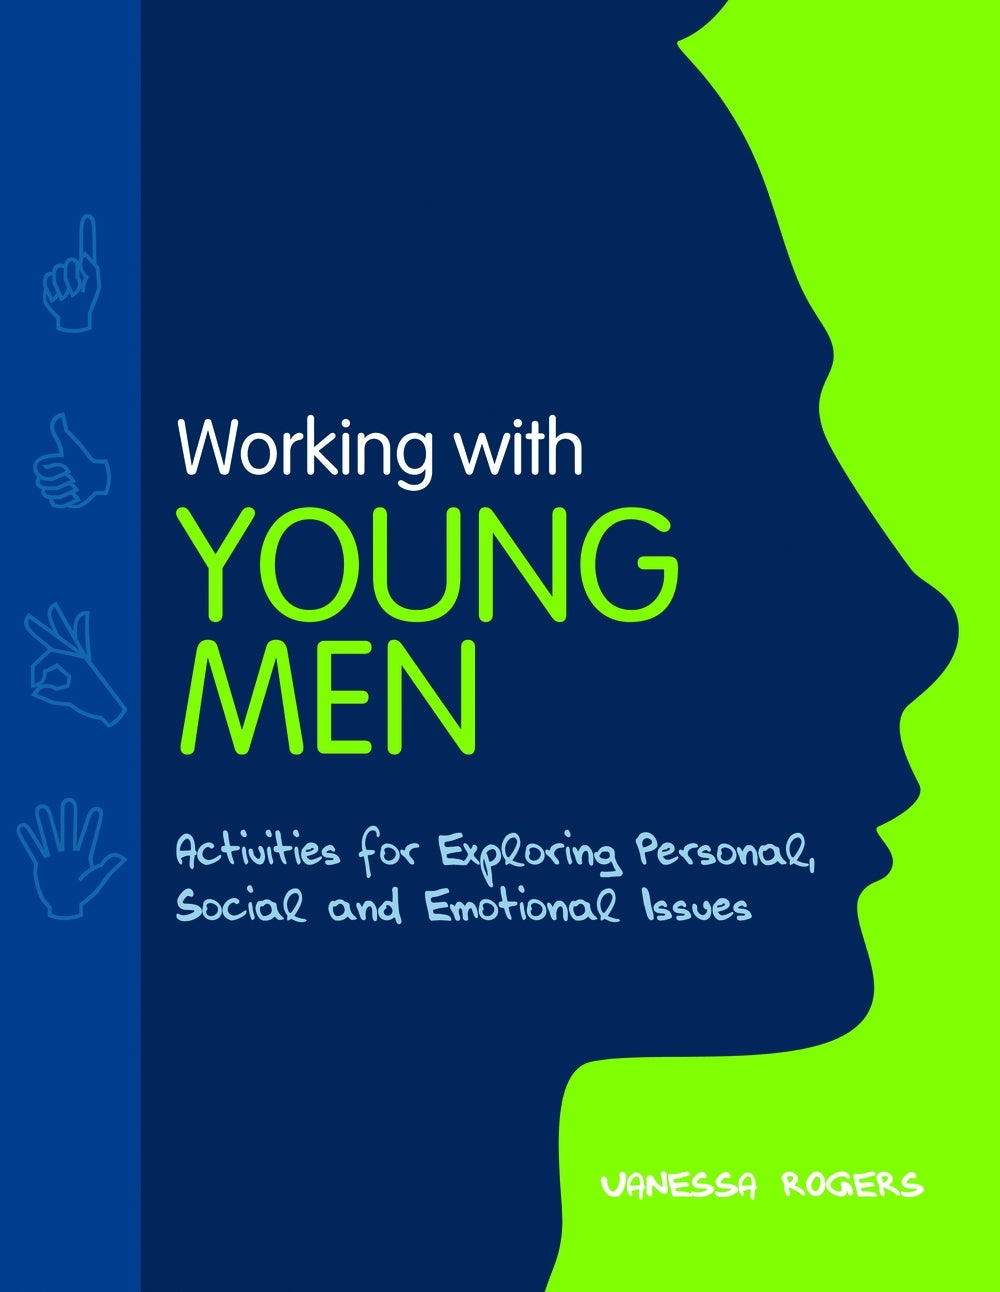 Working with Young Men by Vanessa Rogers